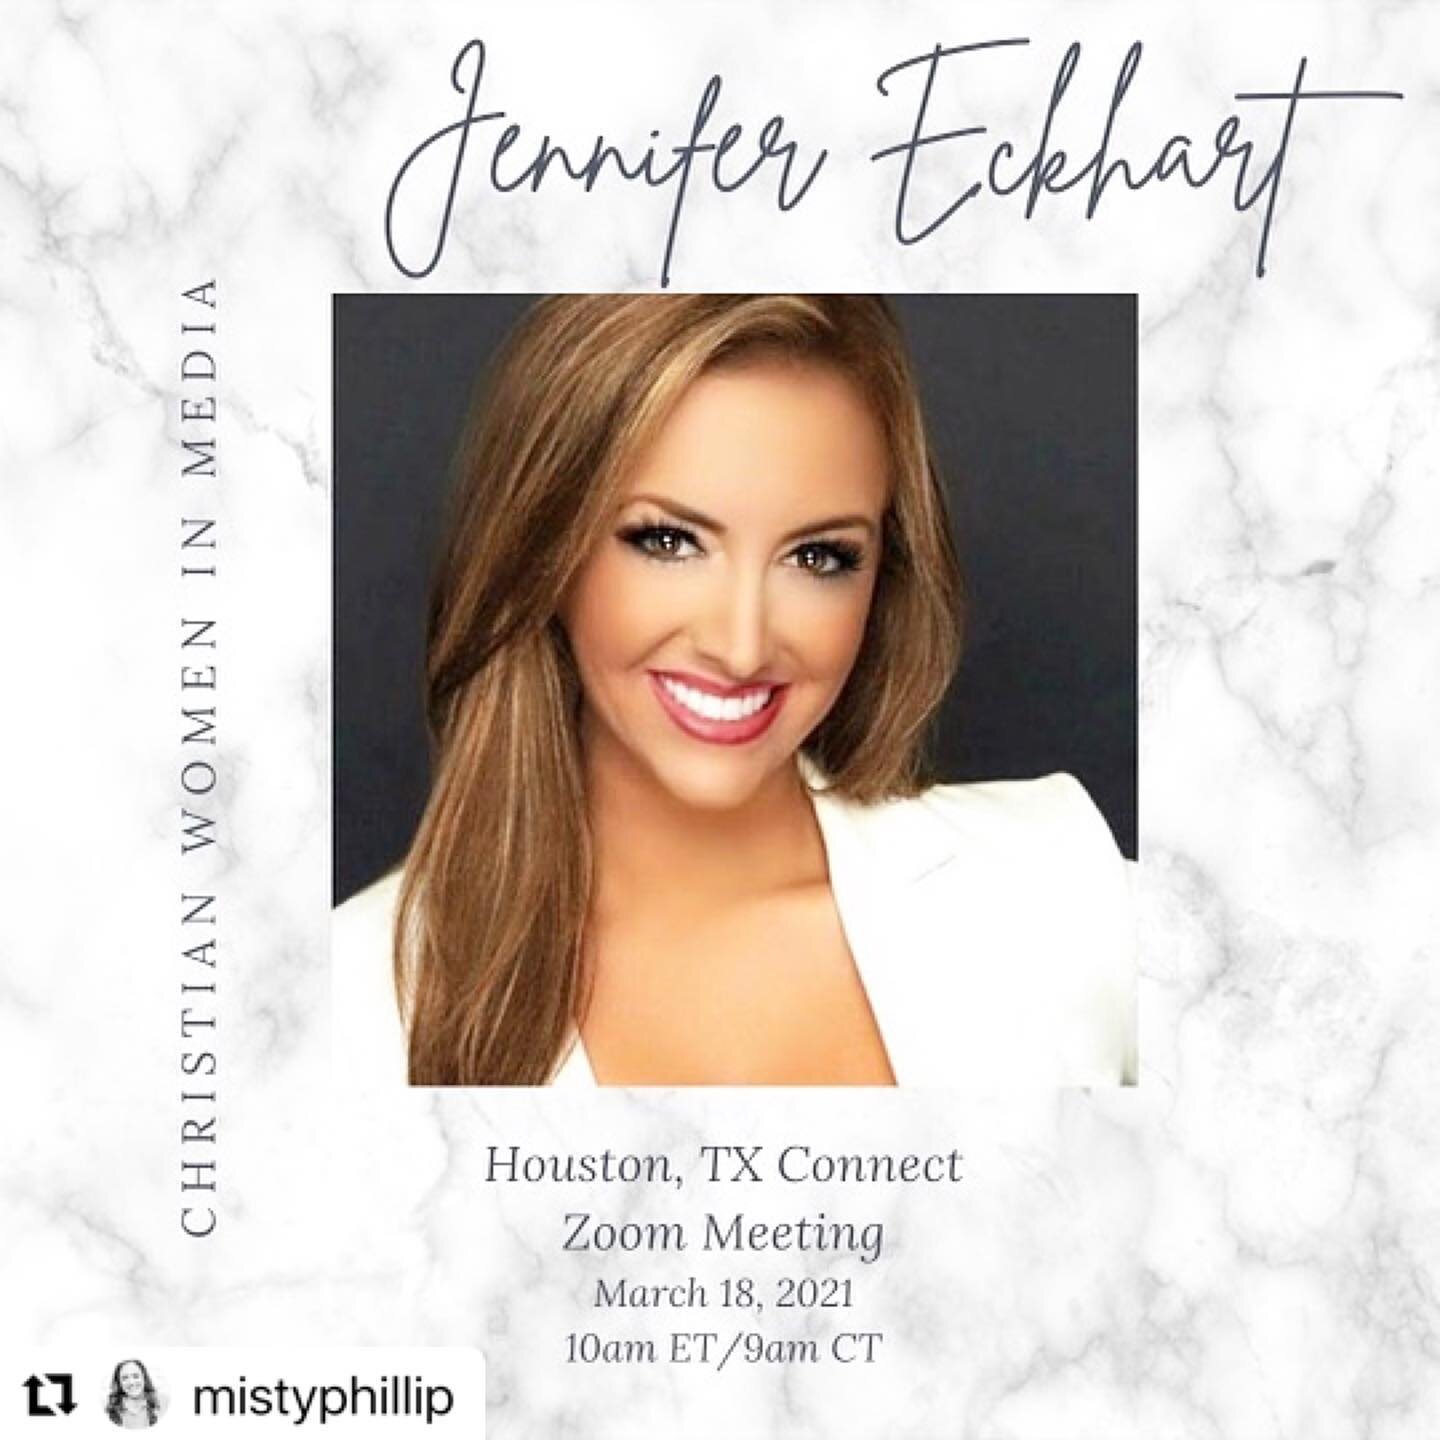 Link to register for tomorrow&rsquo;s event at the link in my bio. This will be fun. See you there!😉 #Repost @mistyphillip
・・・
Ladies, do you want to learn how to get media exposure for your brand? Then you don&rsquo;t want to miss this FREE Christi